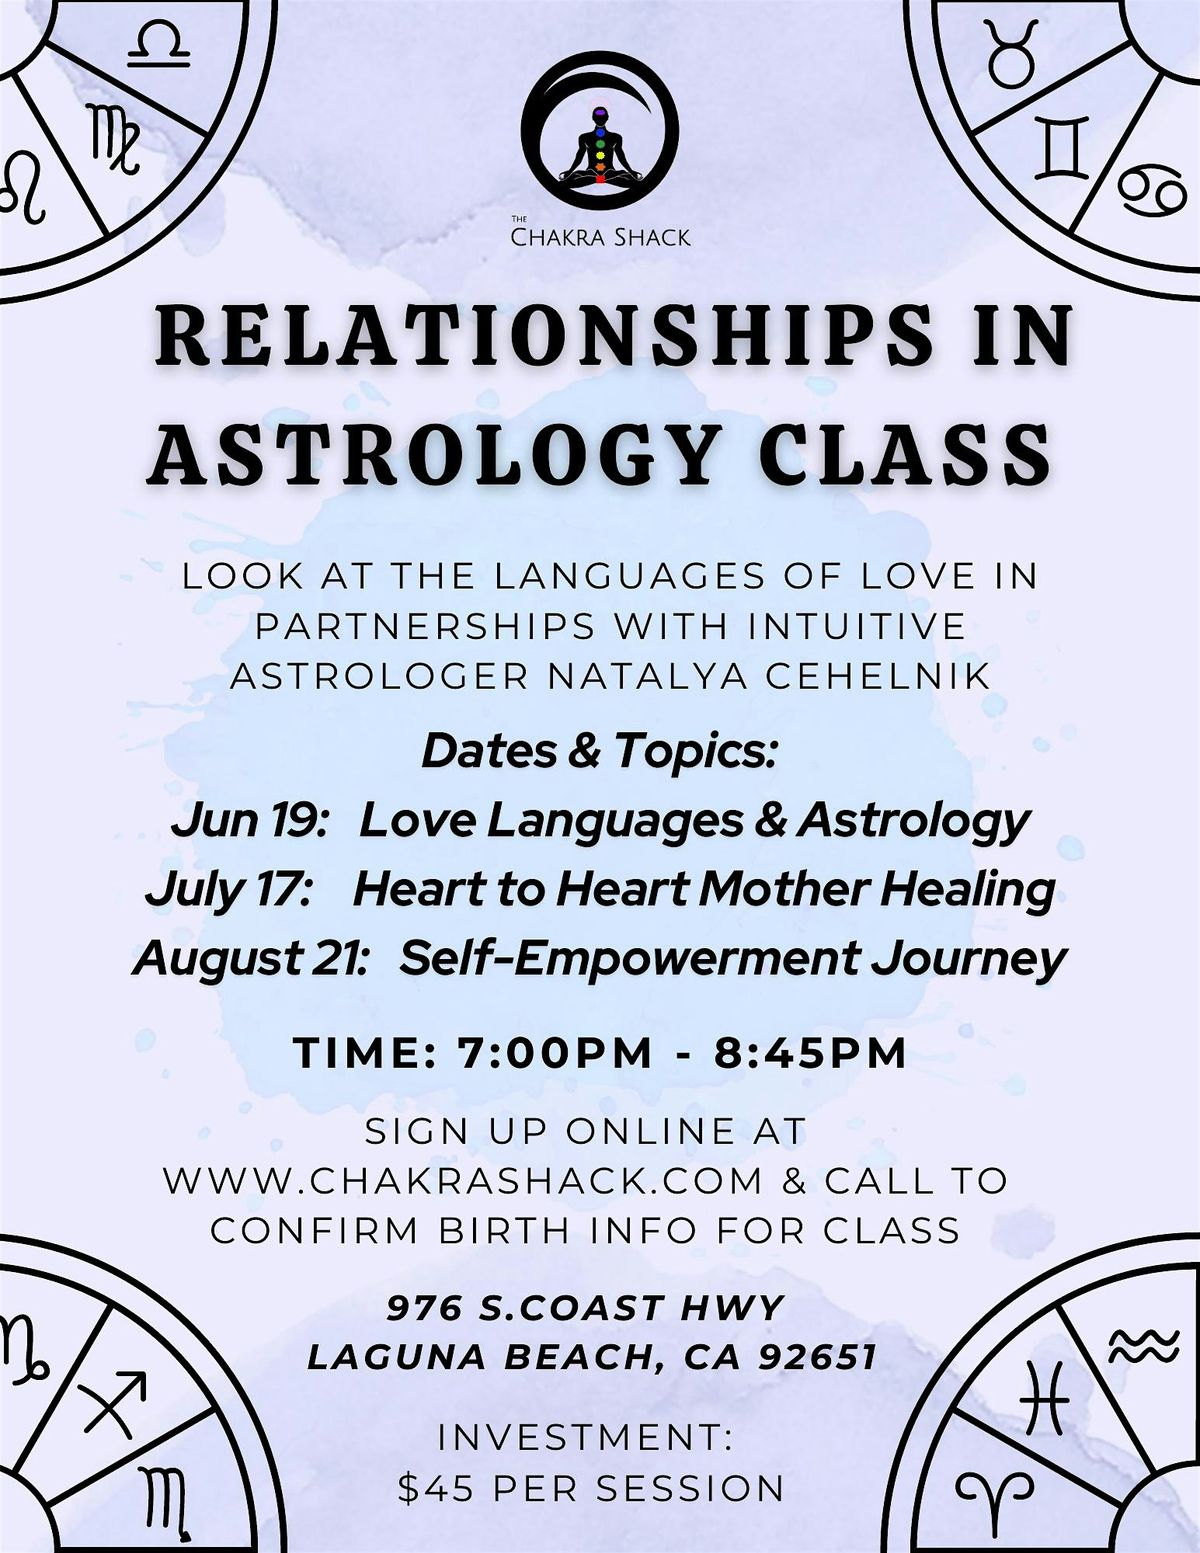 Relationships in Astrology Class